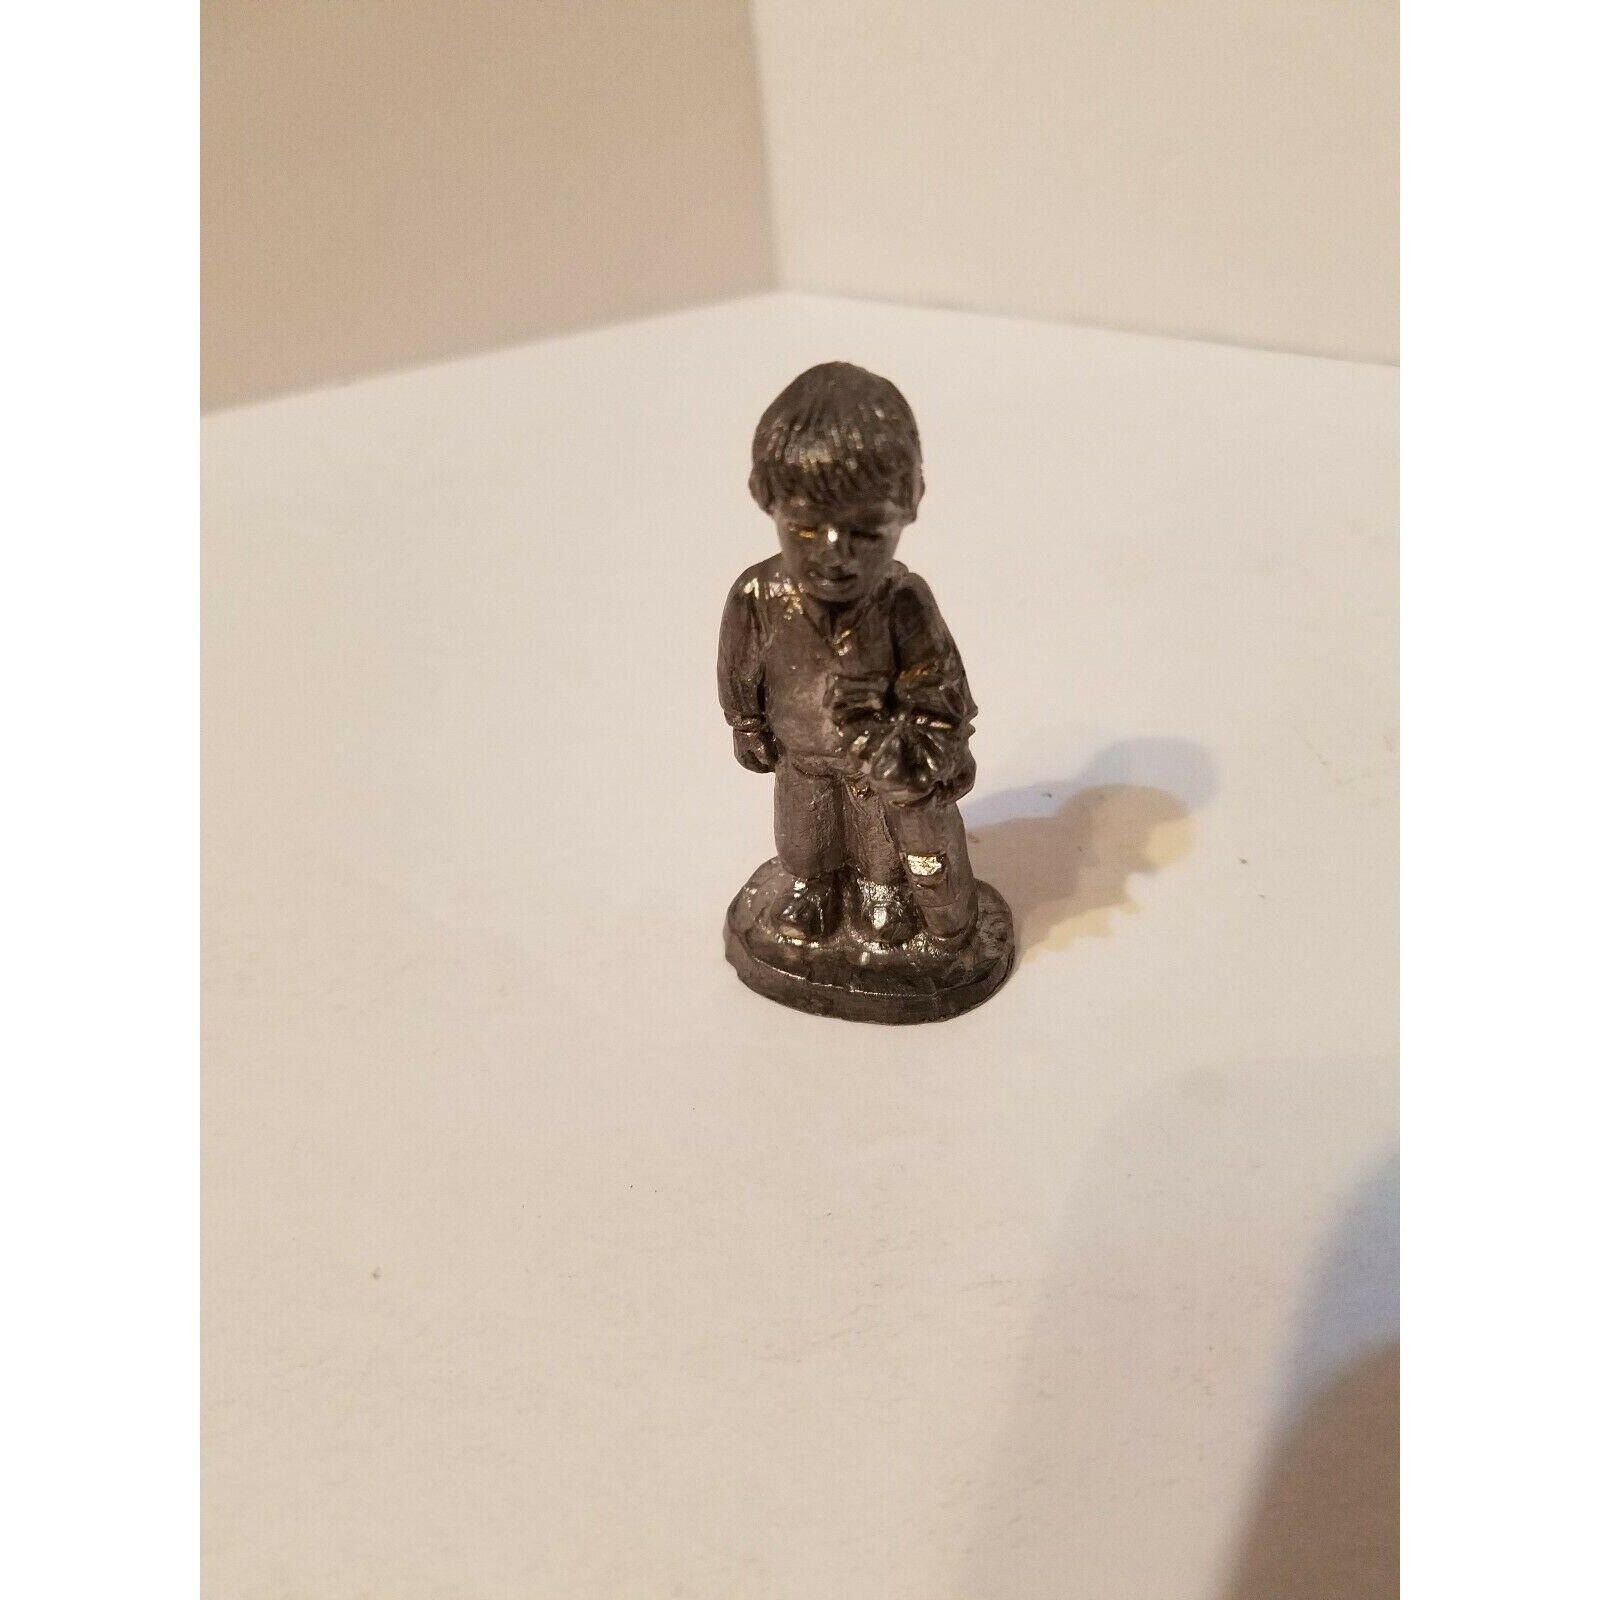 Primary image for Pewter Golf Boy Guy Figurine by R B Pewter Desktop Michael Ricker 2 3/8"